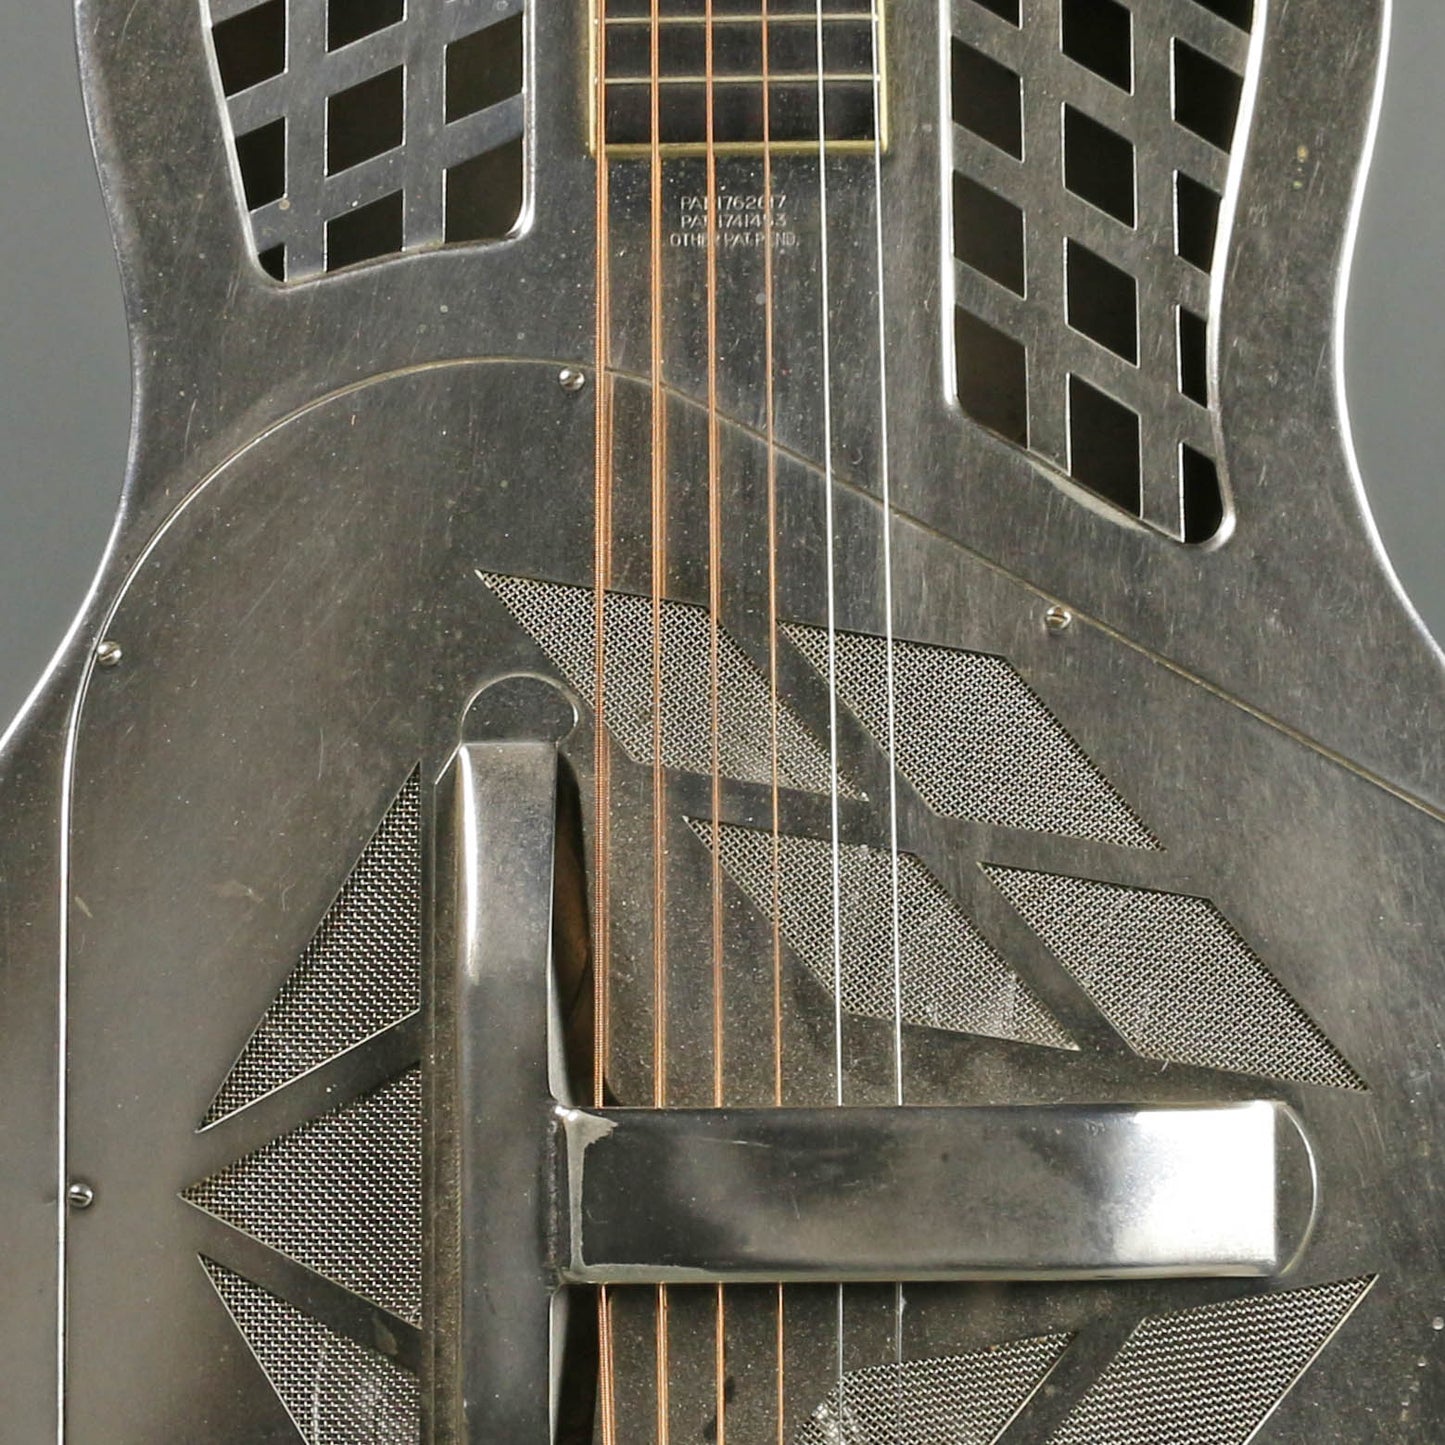 1931 National Style 1 Tri-Cone Squareneck